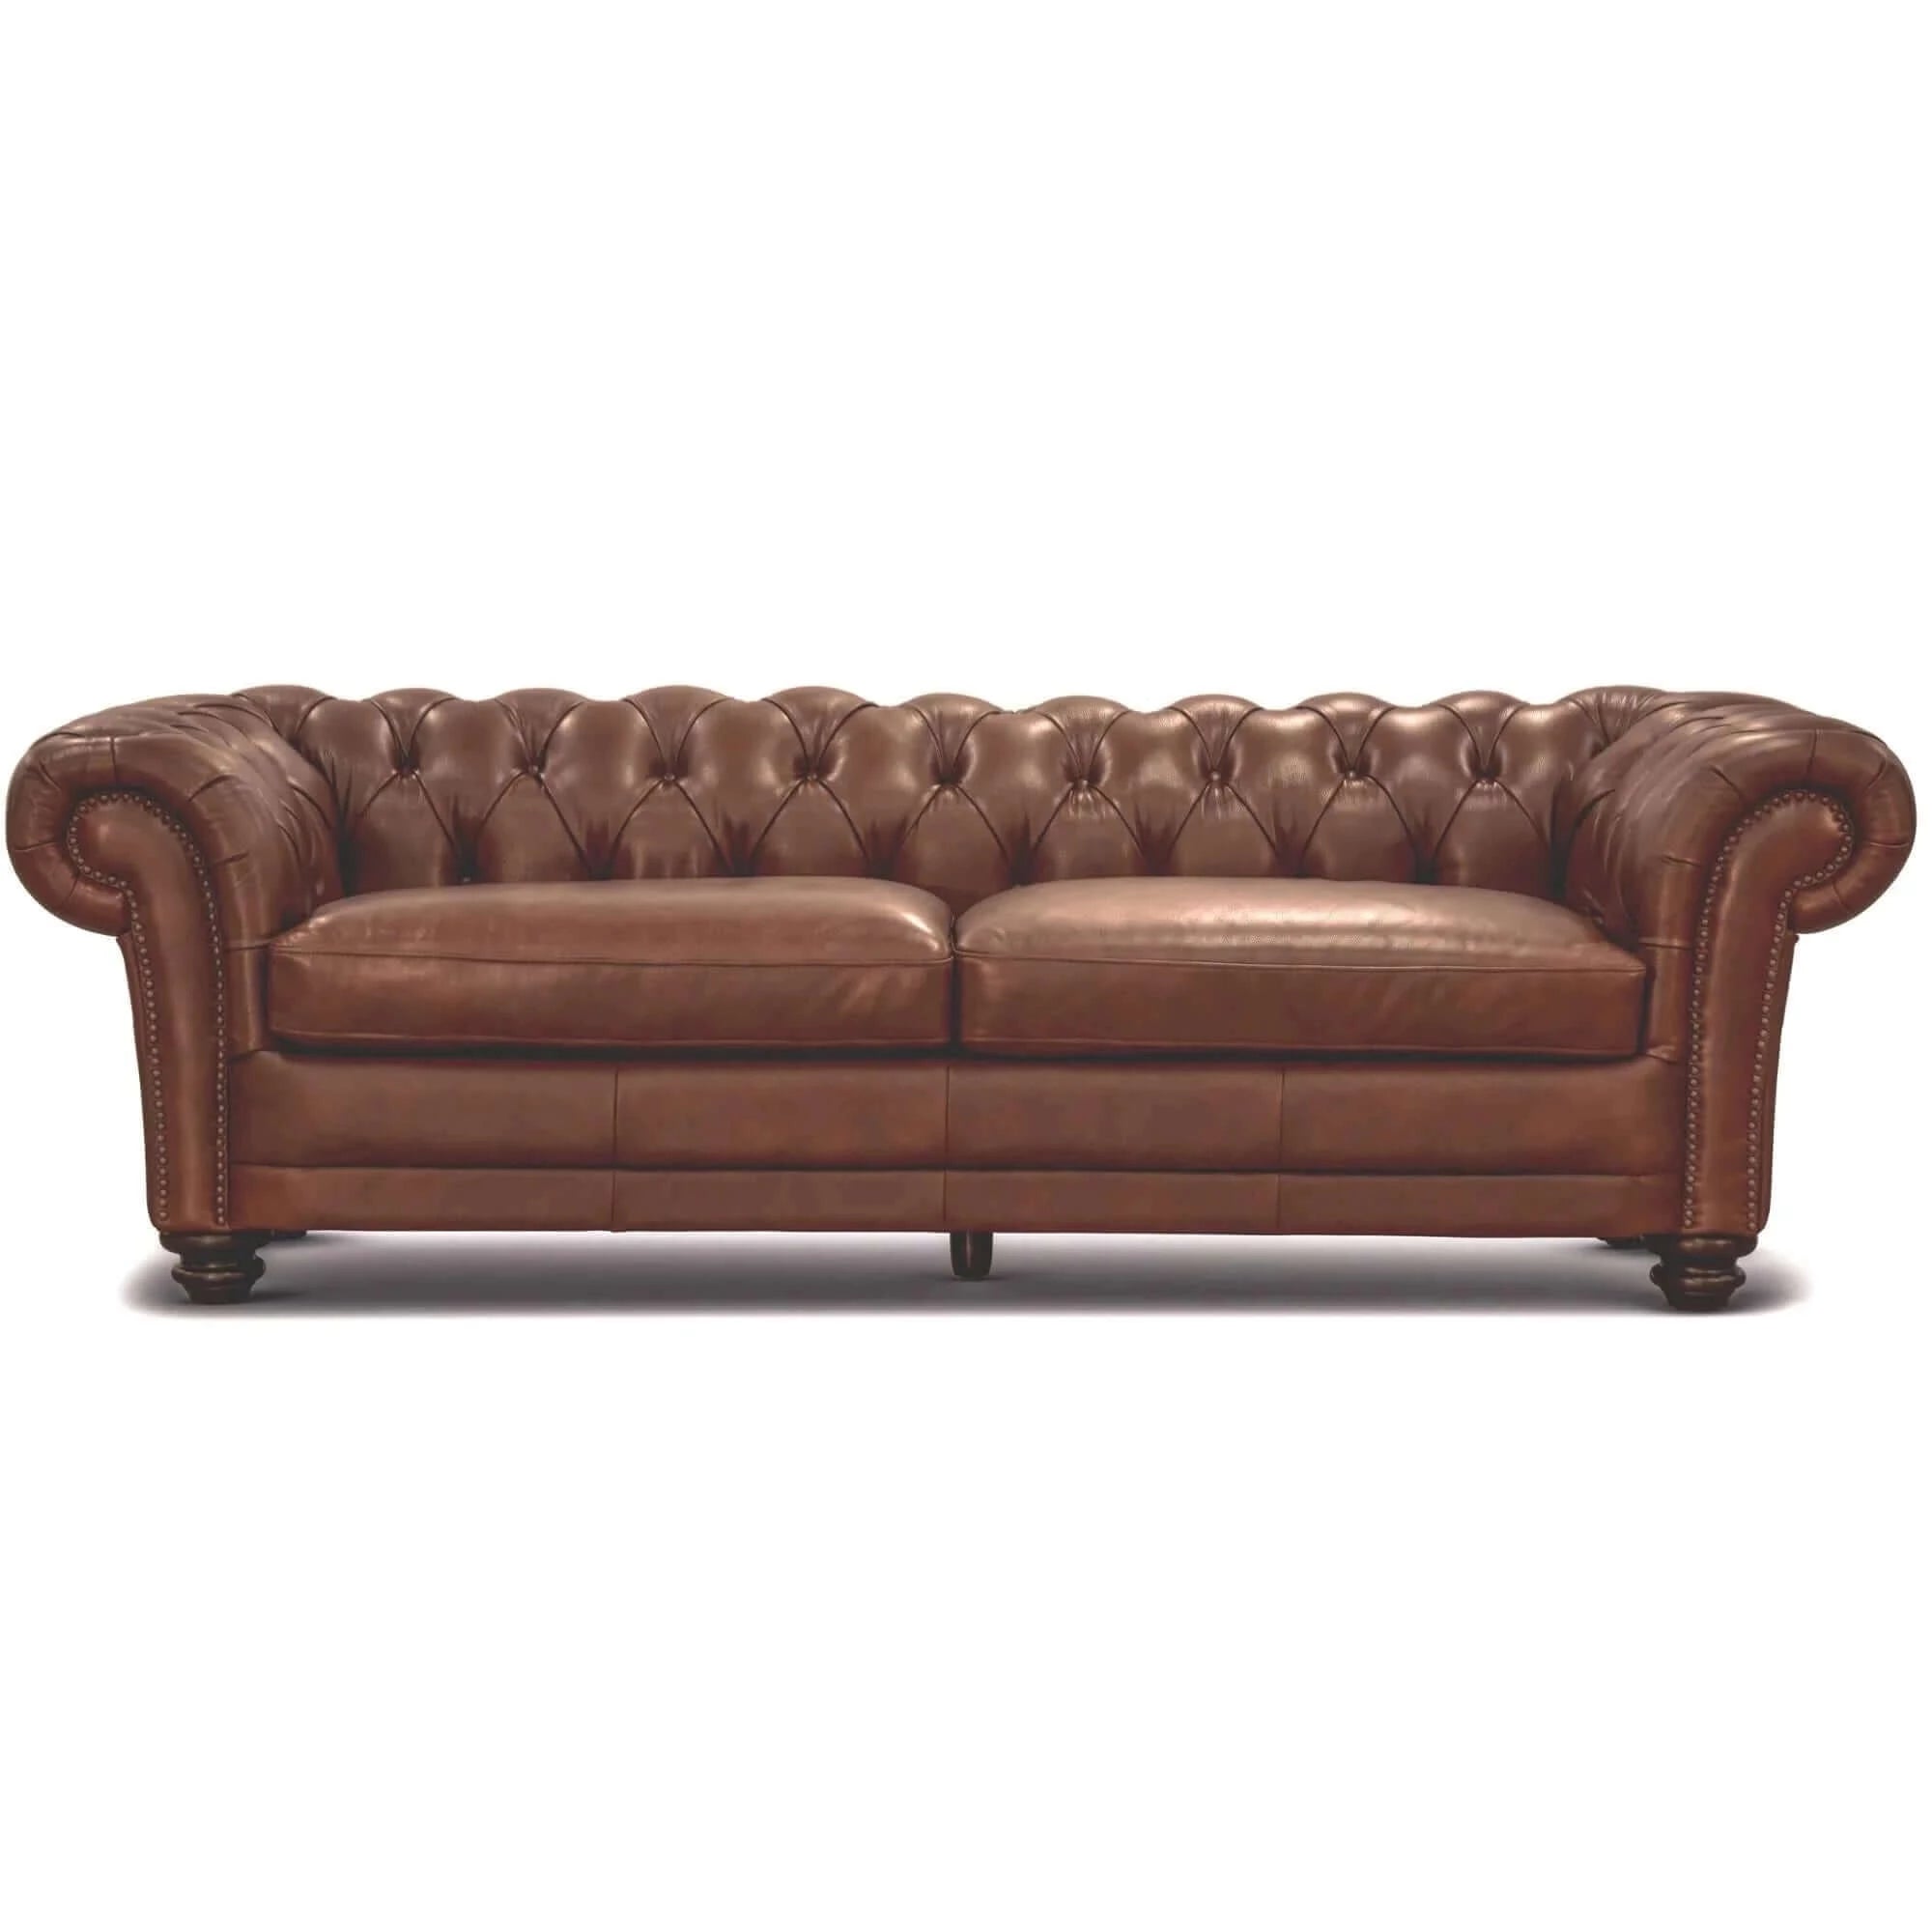 Buy sonny 3+2.5 seater genuine leather sofa chestfield lounge couch - butterscotch - upinteriors-Upinteriors